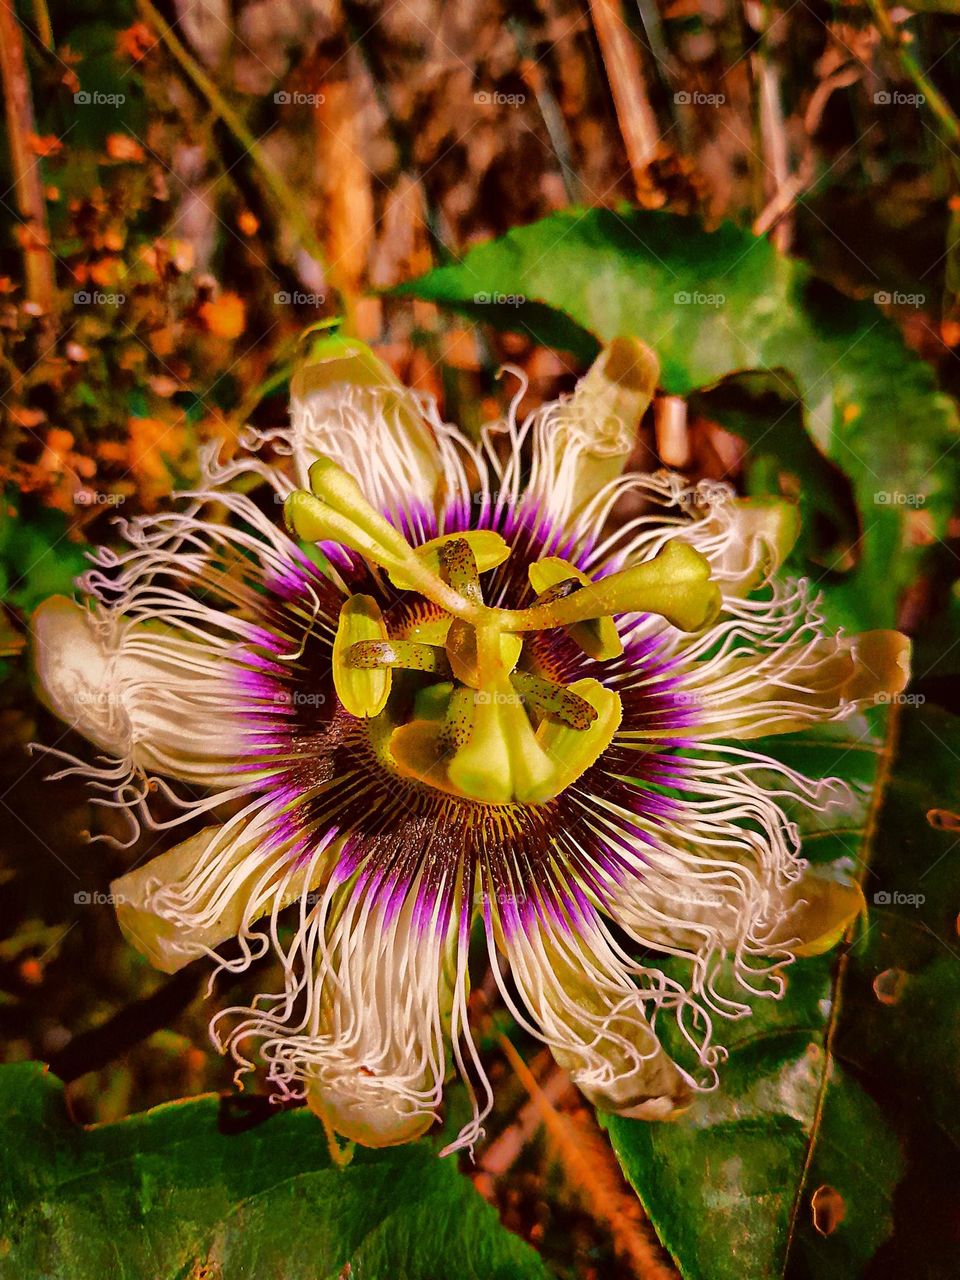 Brazilian Native Passion Fruit Flower Blooming